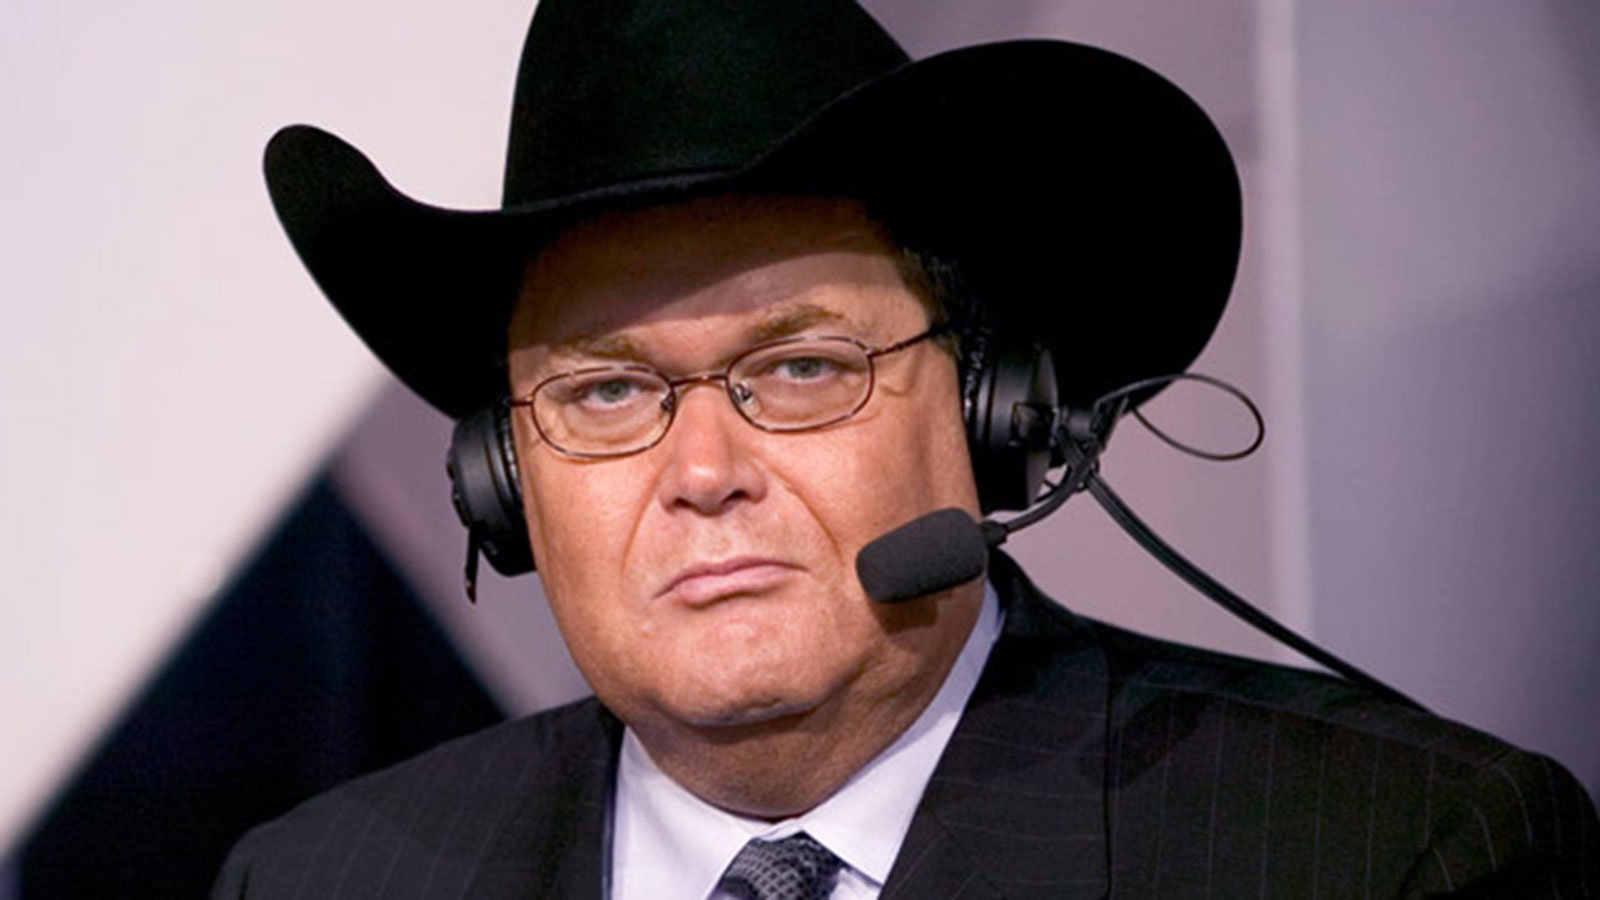 The Indiana Pizza Club wishes Jim Ross a VERY HAPPY BIRTHDAY today! Enjoy some BBQ pizza today, J.R.!     